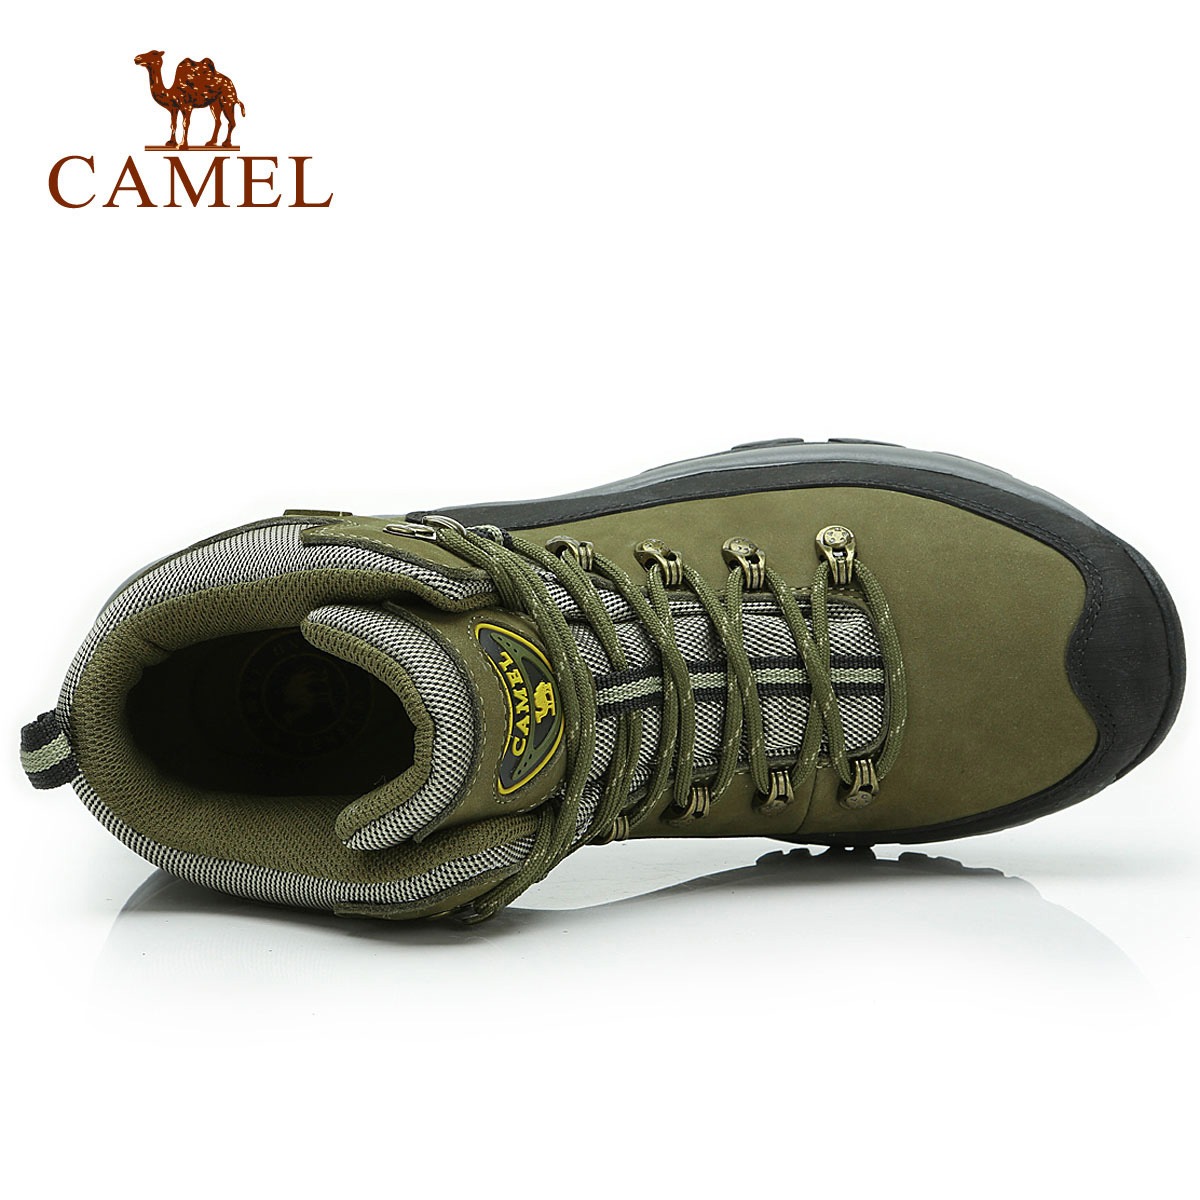 Camel outdoor shoes shoes shoes head layer cowhide skid resistant male ...